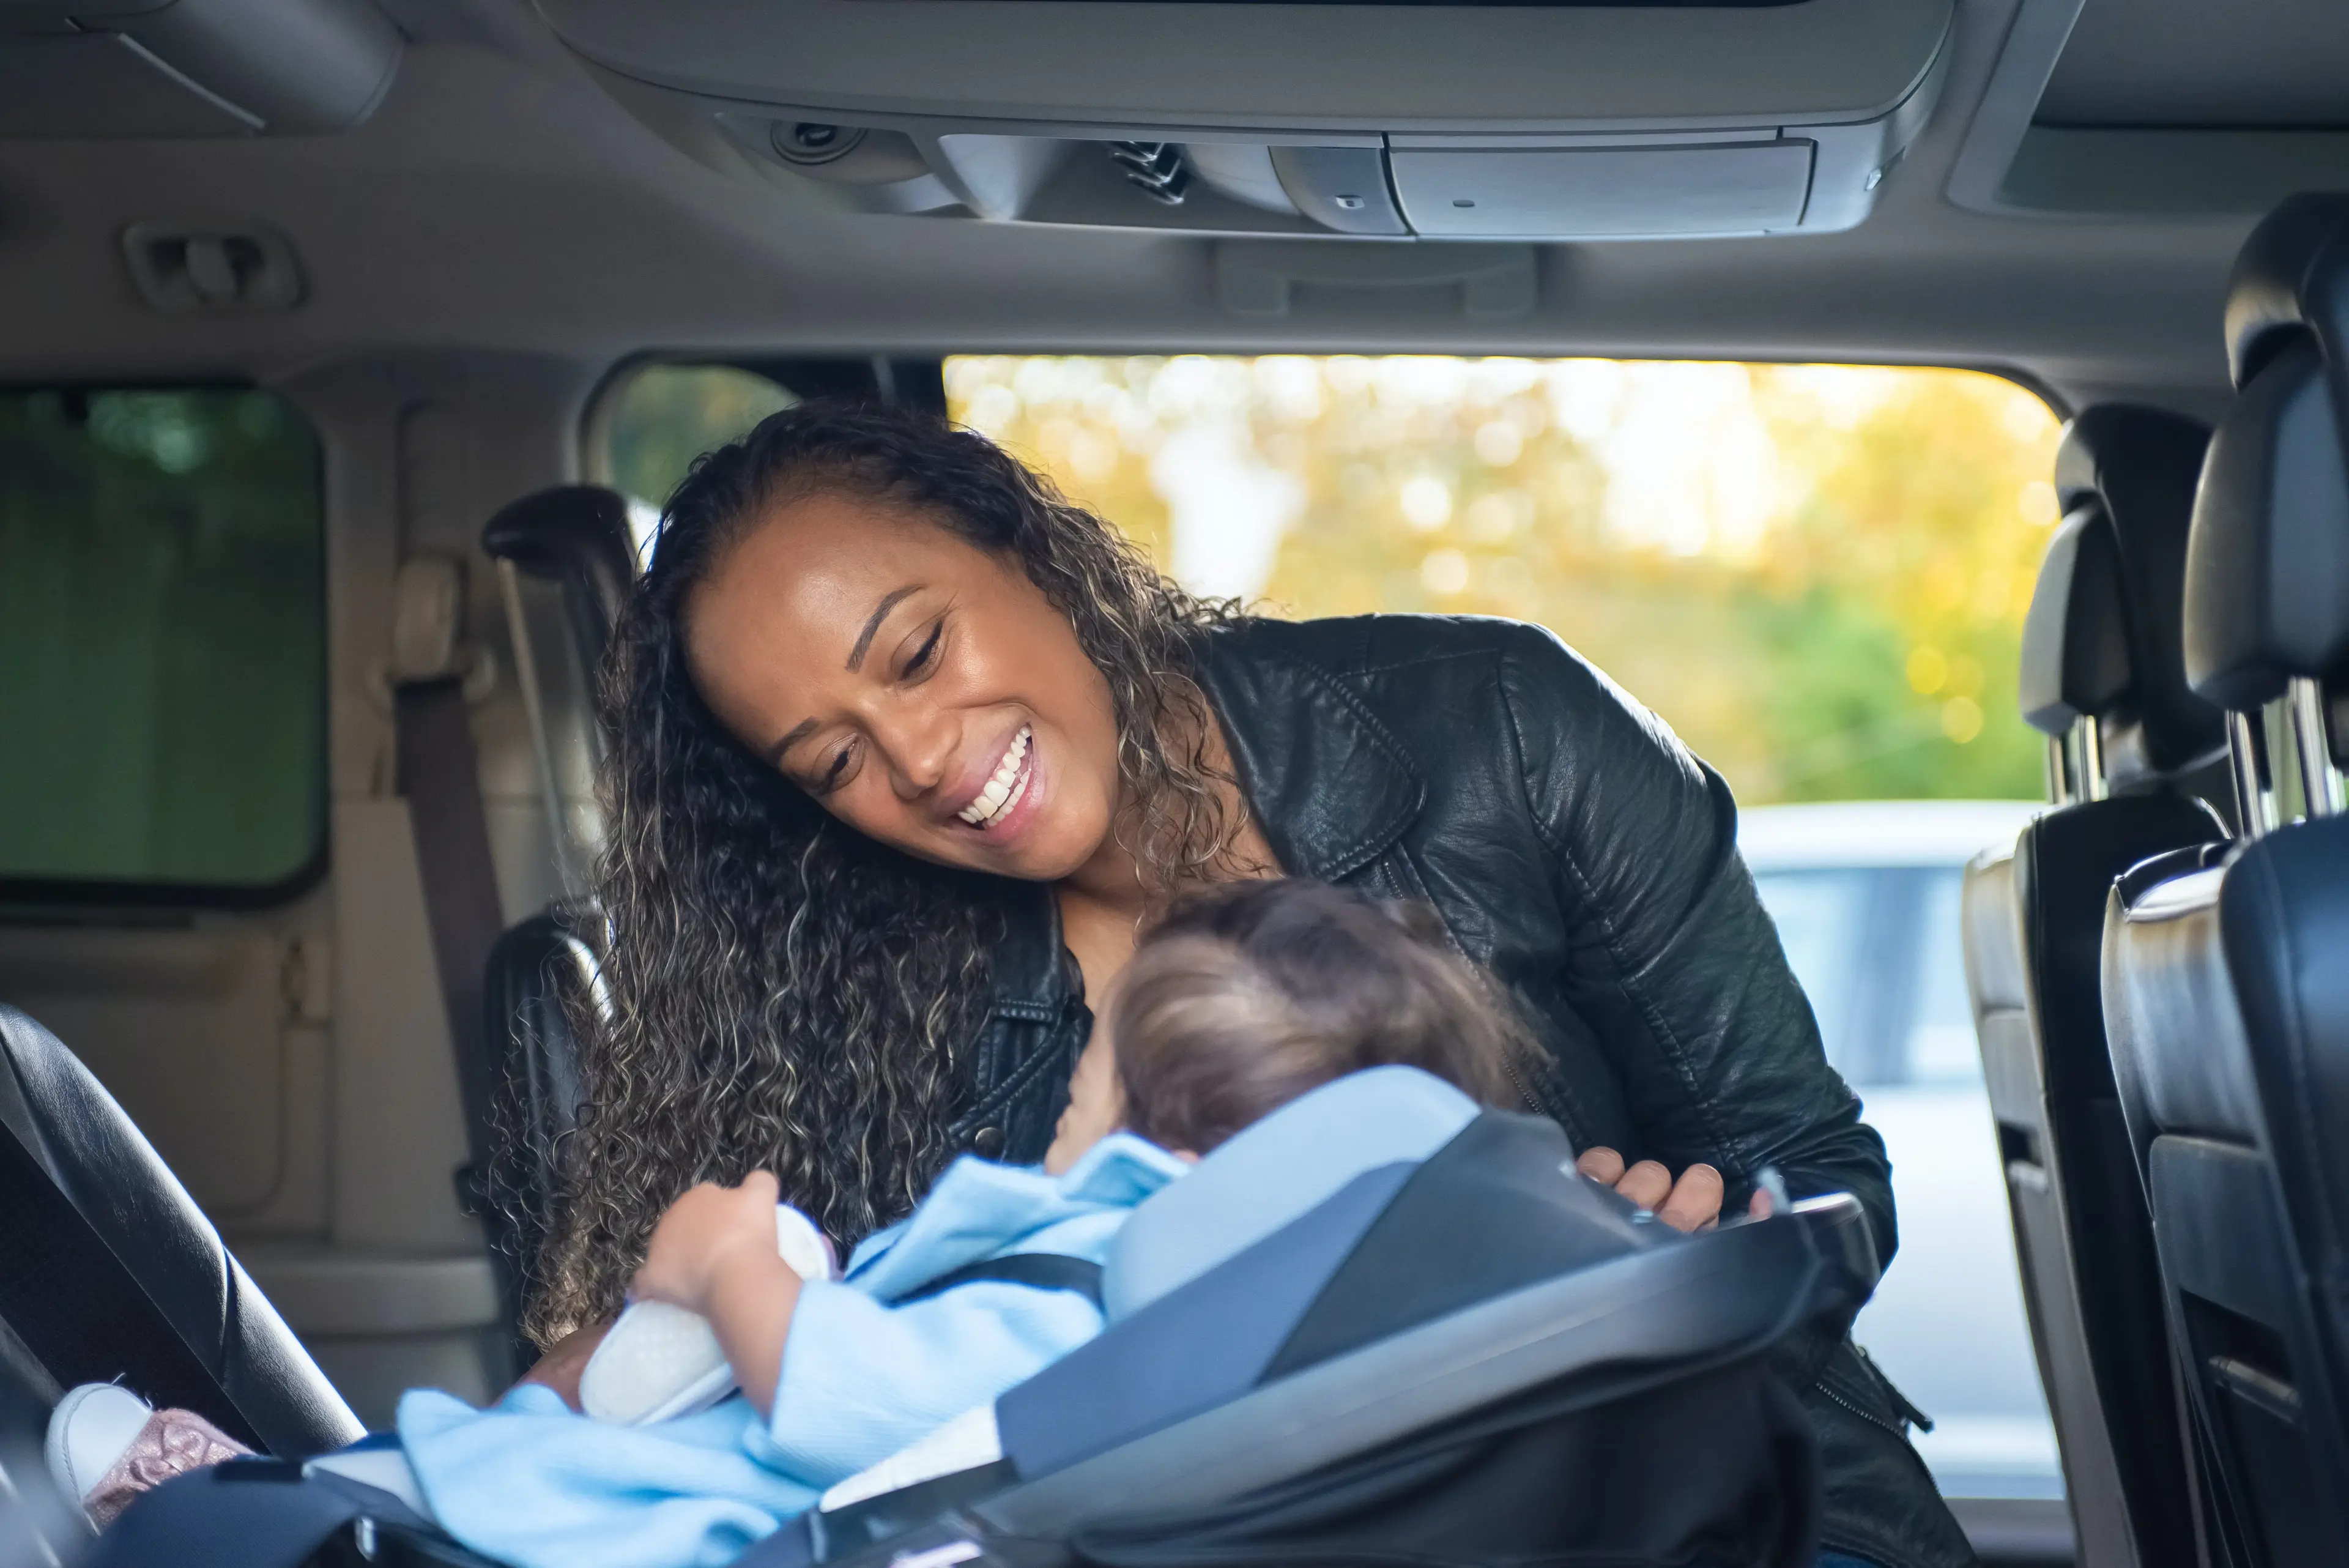 Woman in Black Leather Jacket Tending To Child Sitting on Car Seat